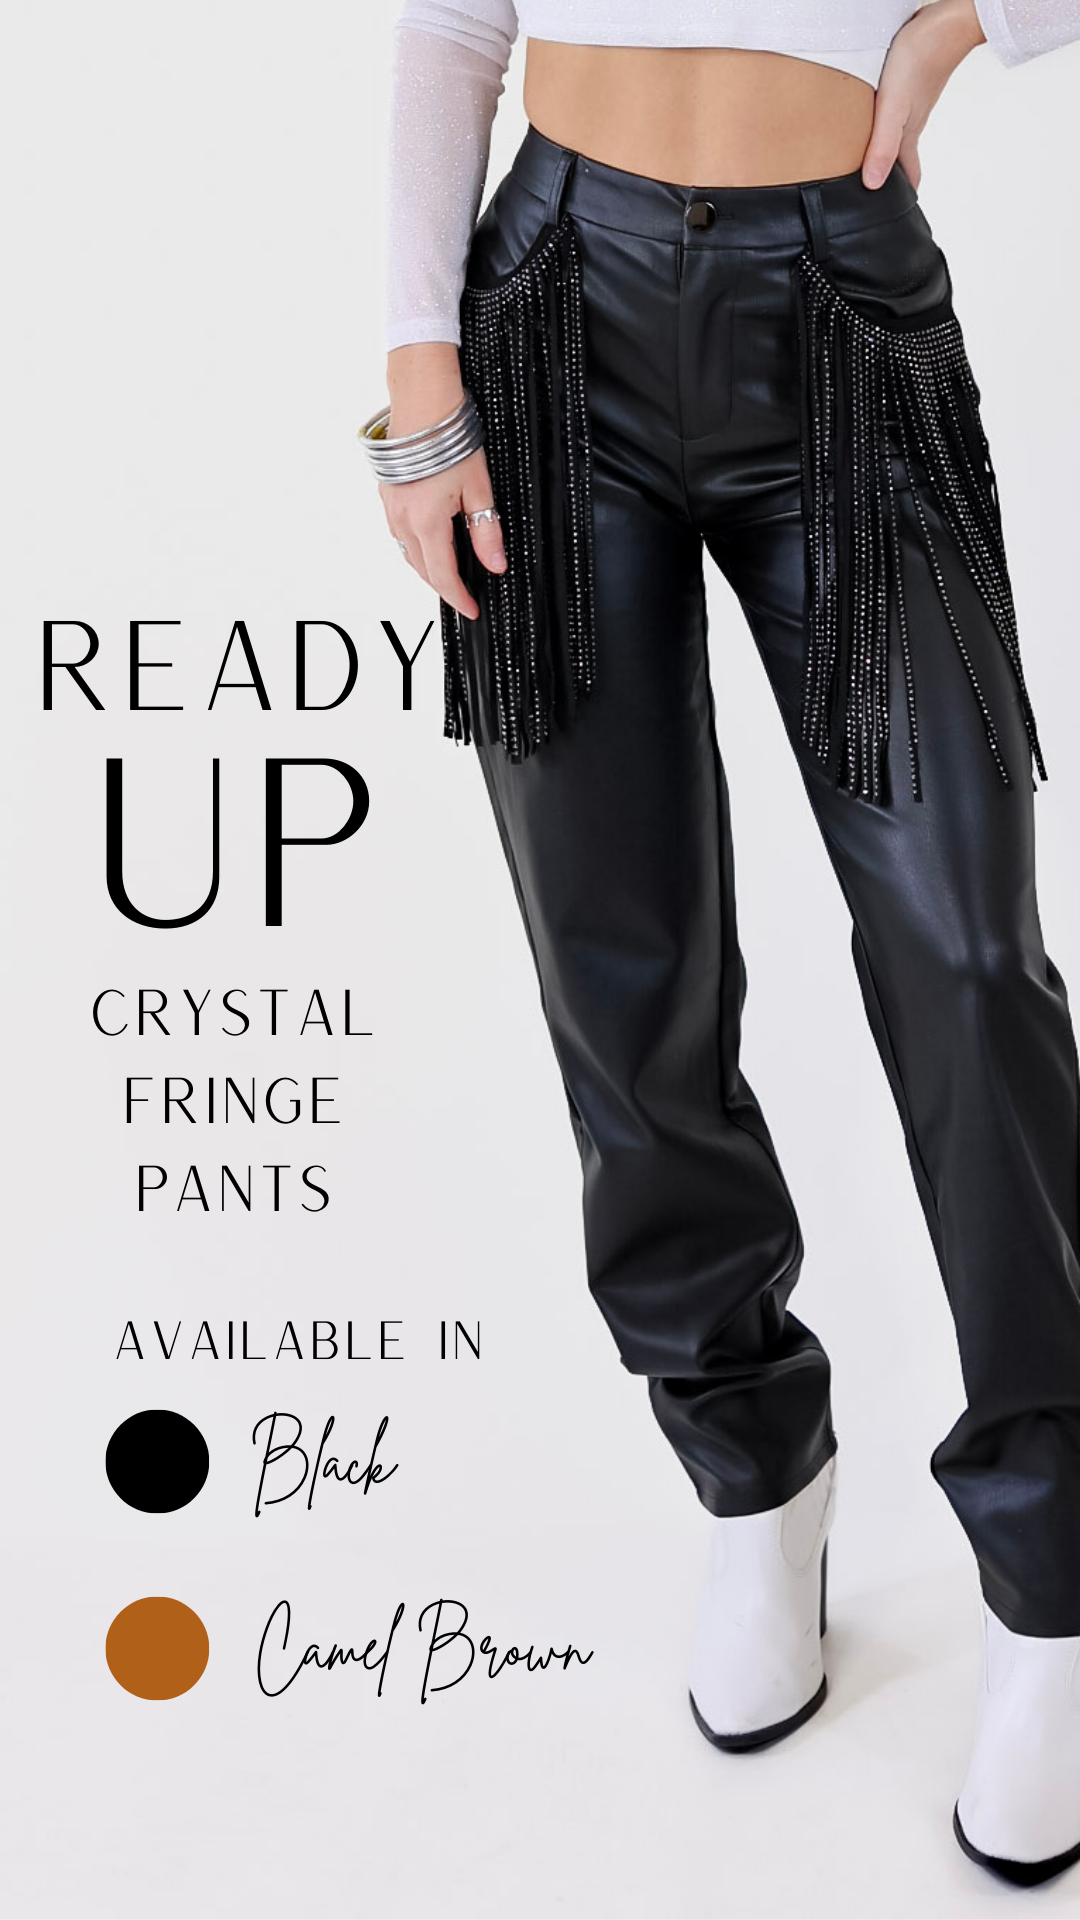 SPANX | Leather-Like Flare Pants in Black